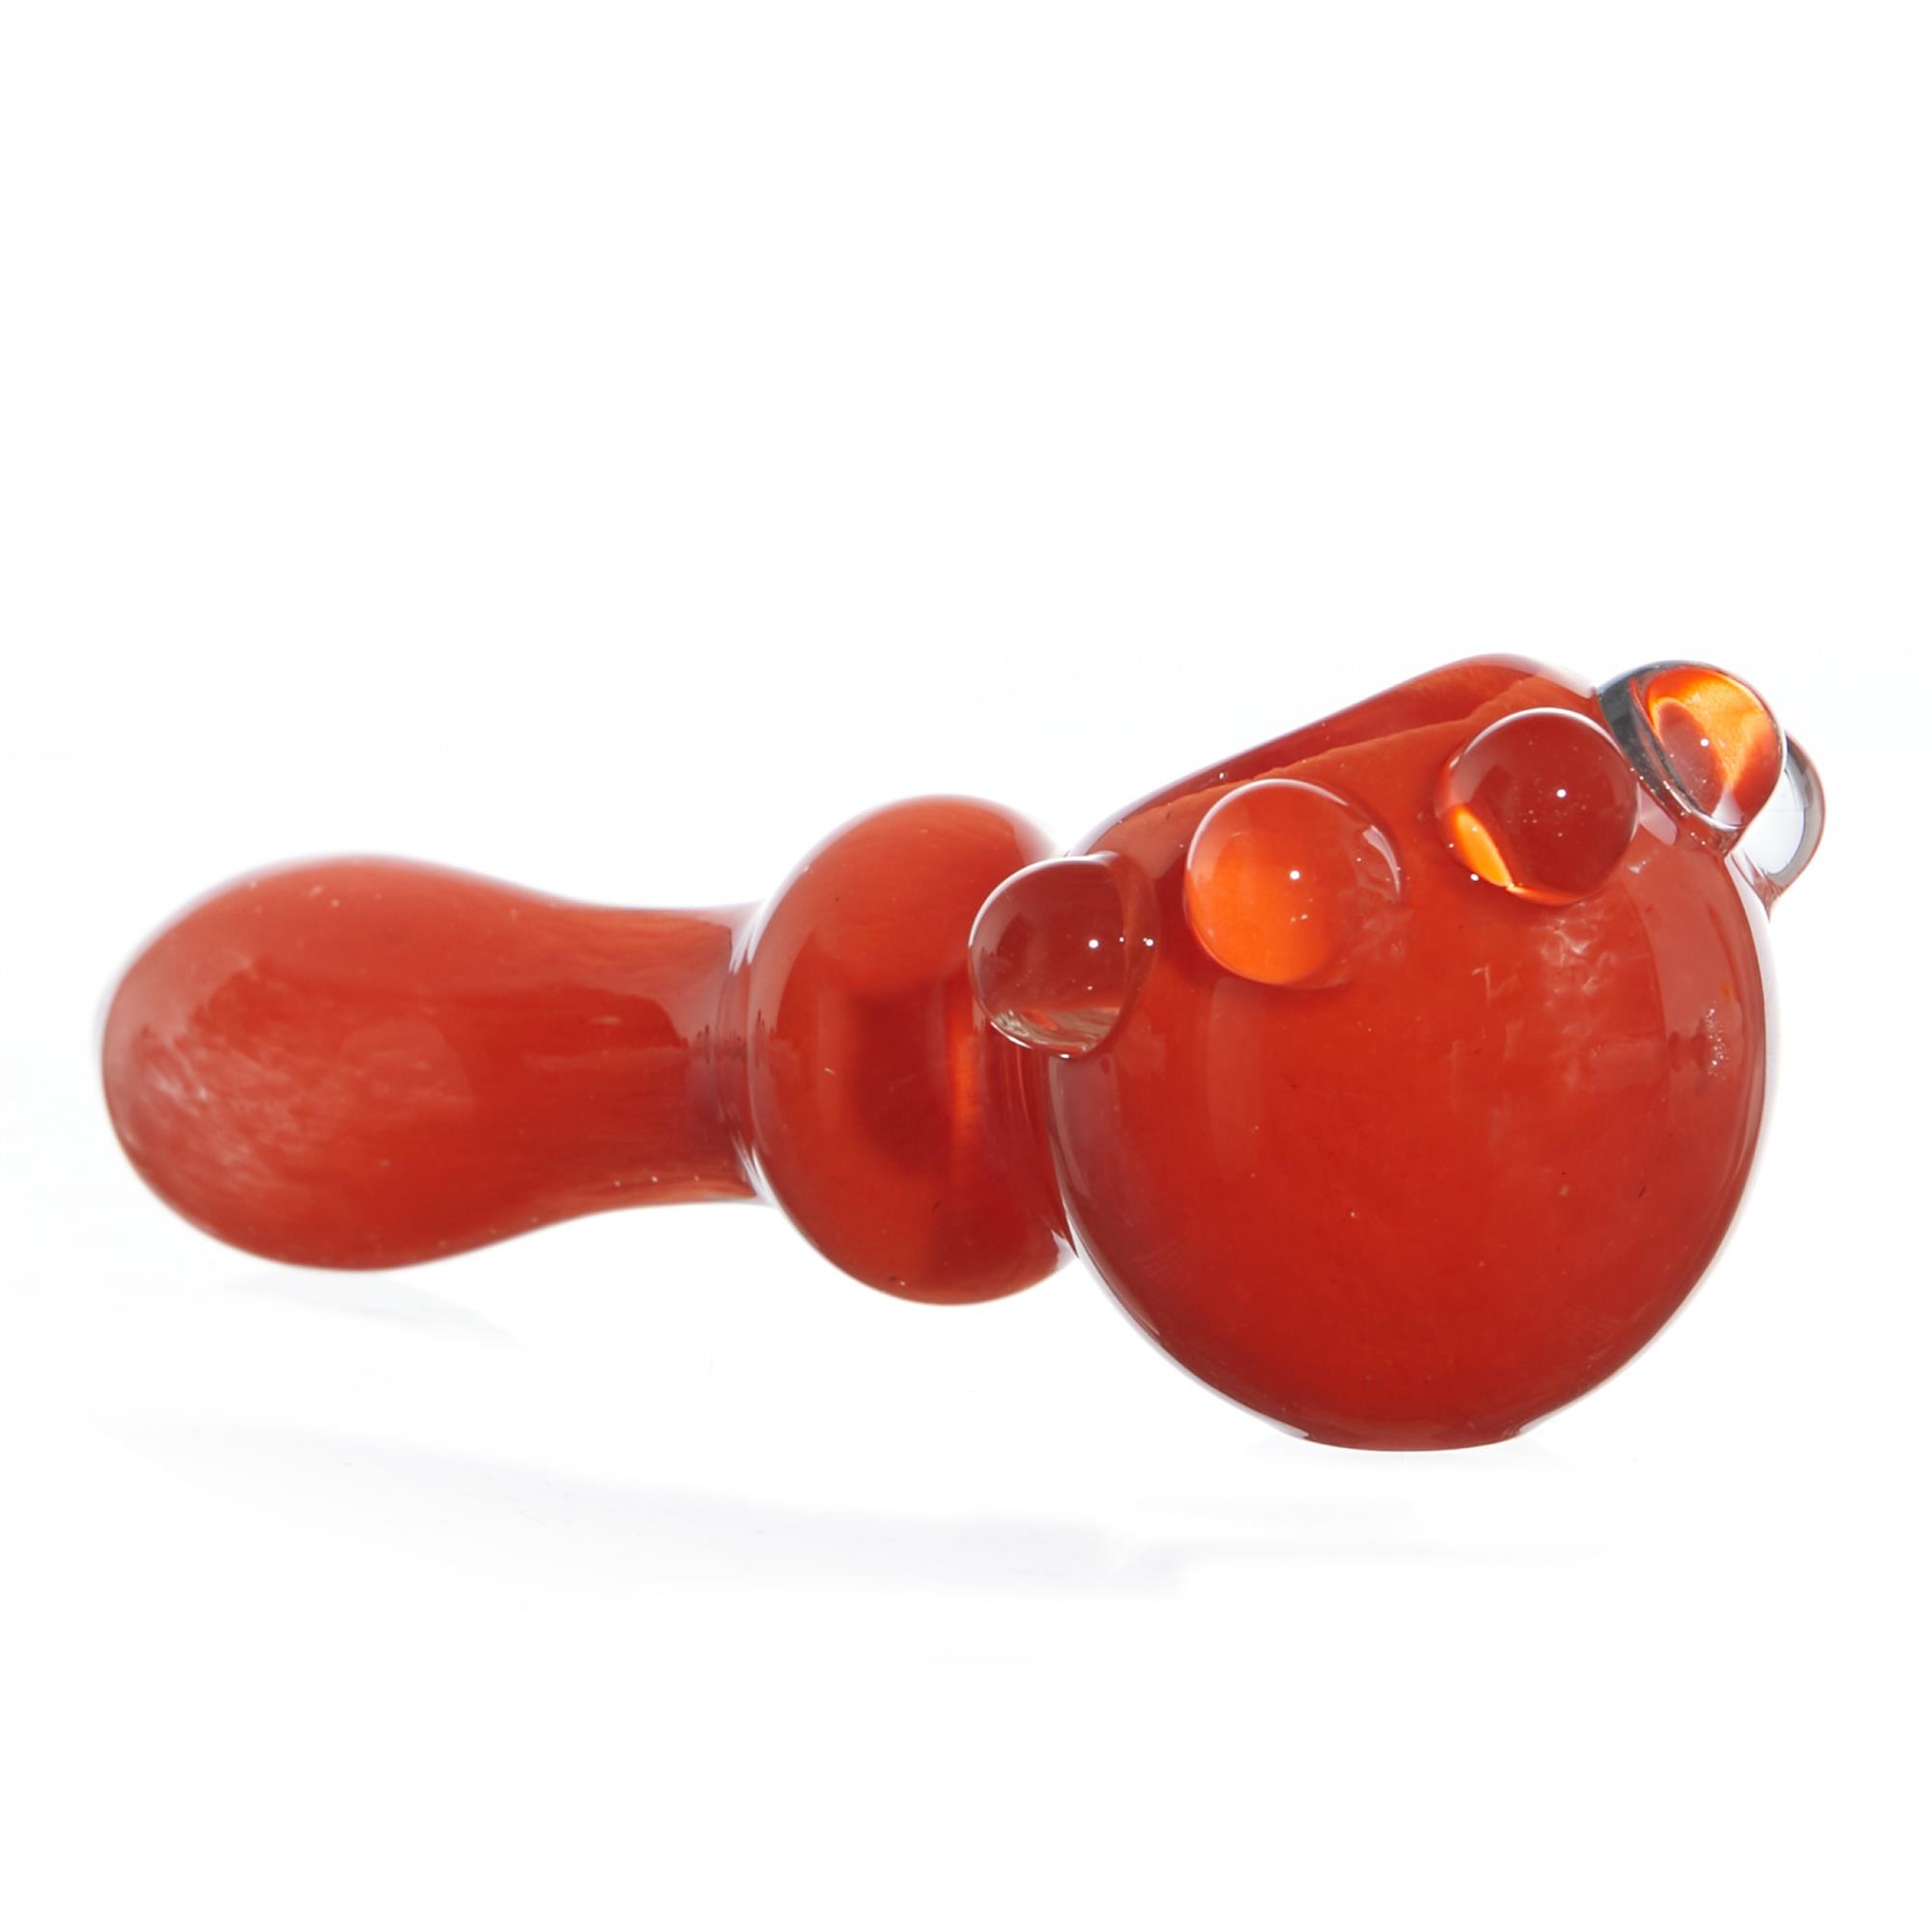 CAT ALLEY SPOON PIPE